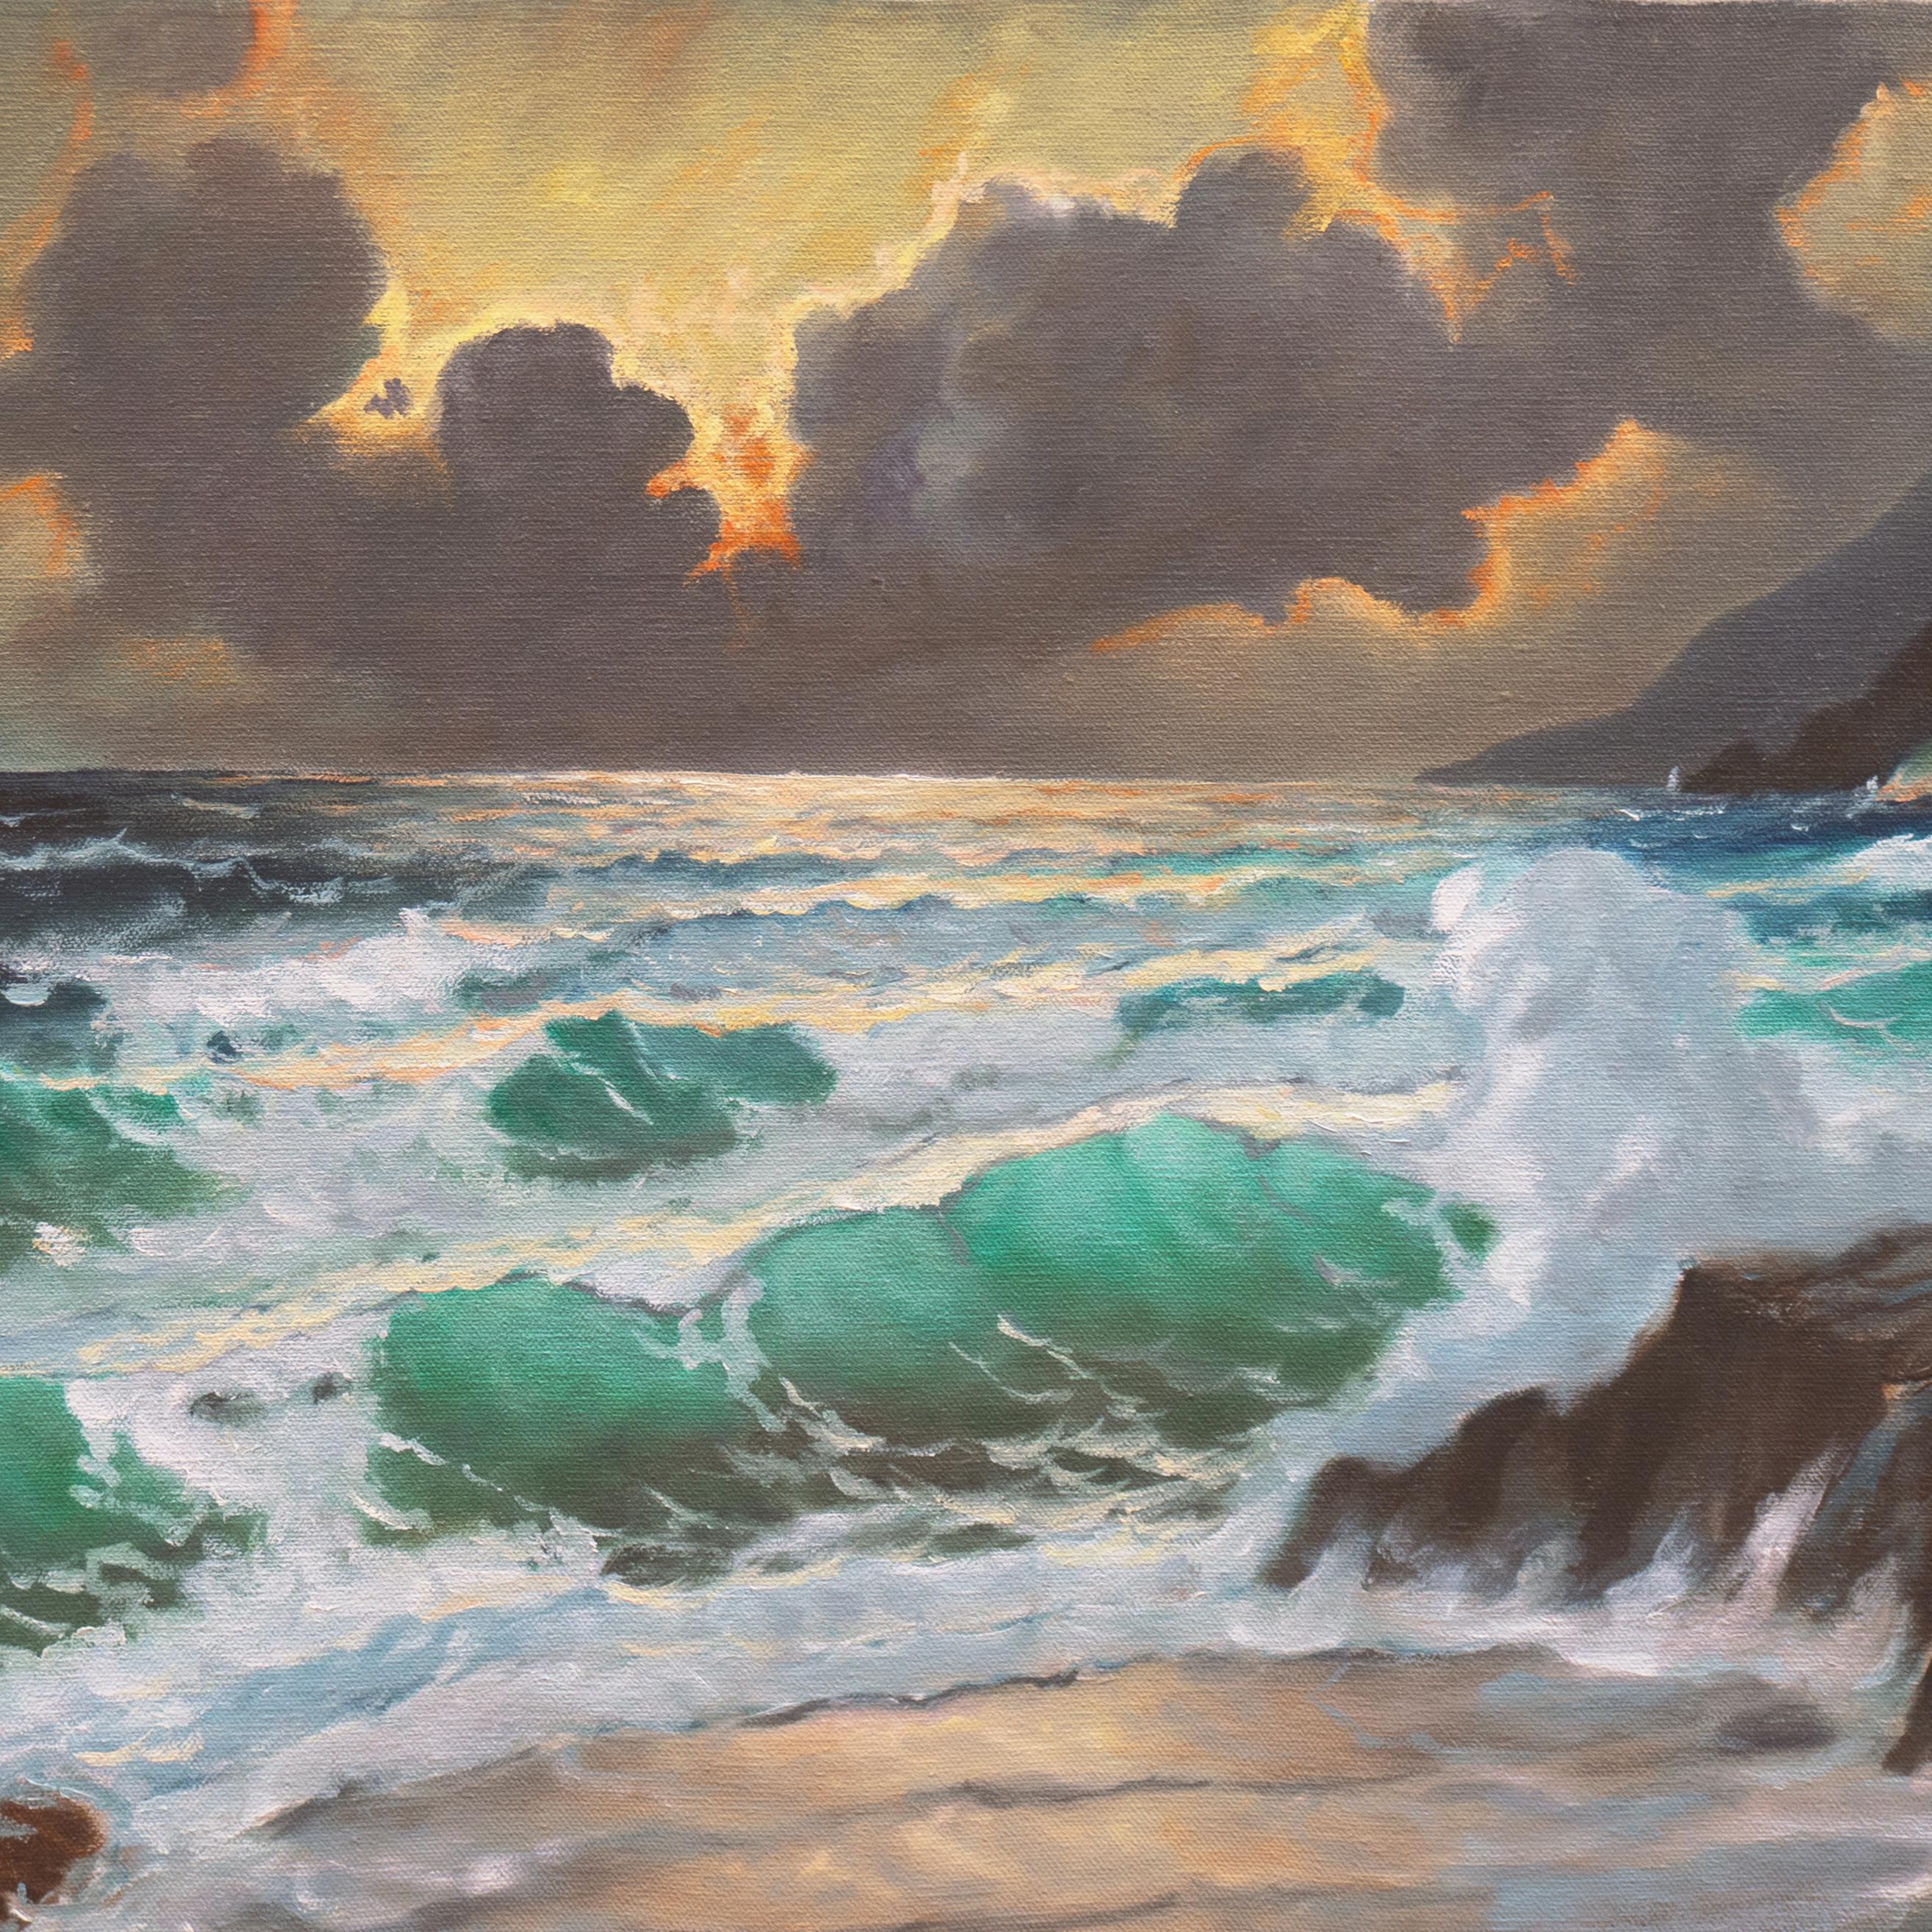 'Sunset Breakers, Rocky Coast'. Pacific Ocean Beach, Seascape, Cypress Trees  - Post-Impressionist Painting by 20th century American School